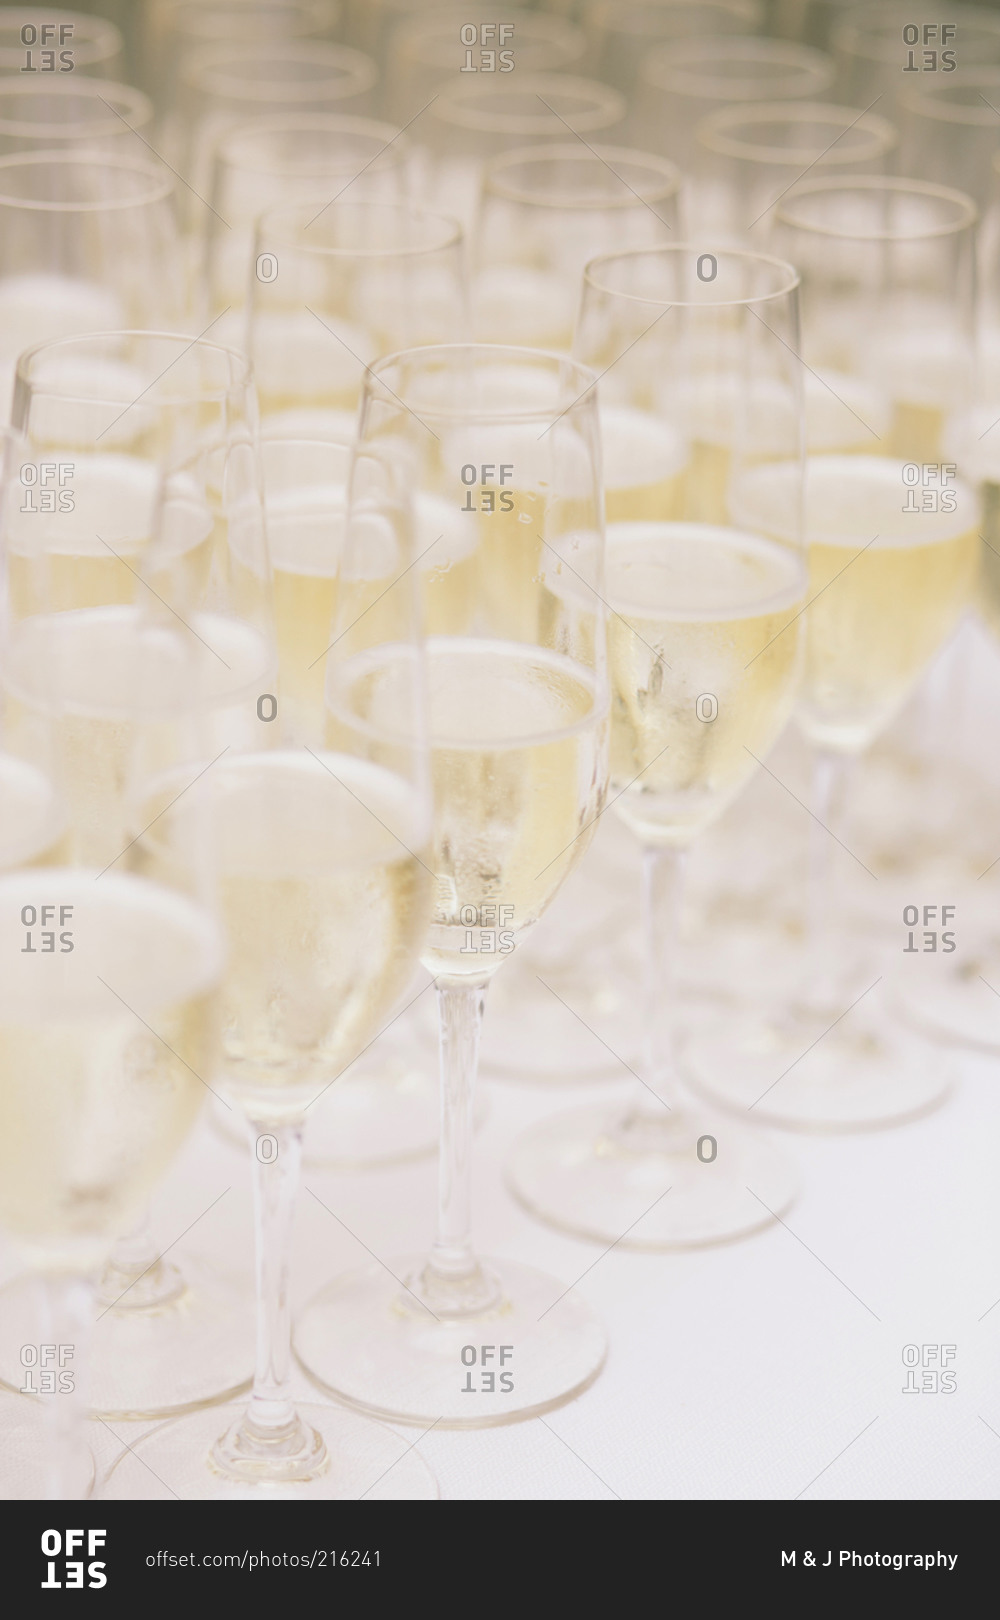 Full champagne glasses on wedding reception table